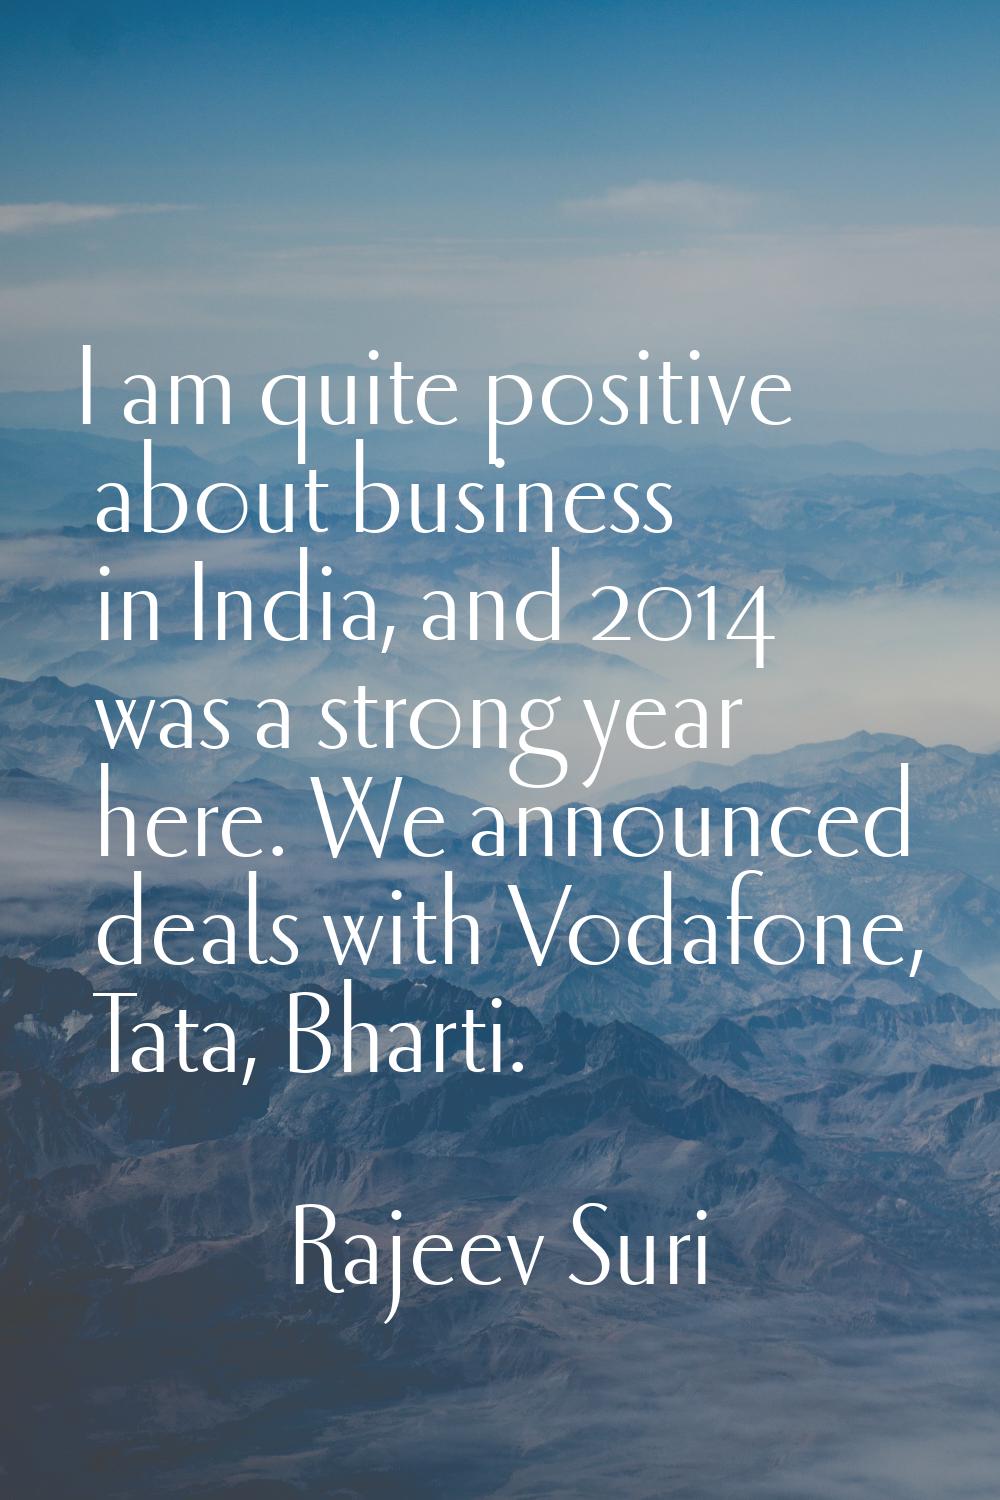 I am quite positive about business in India, and 2014 was a strong year here. We announced deals wi